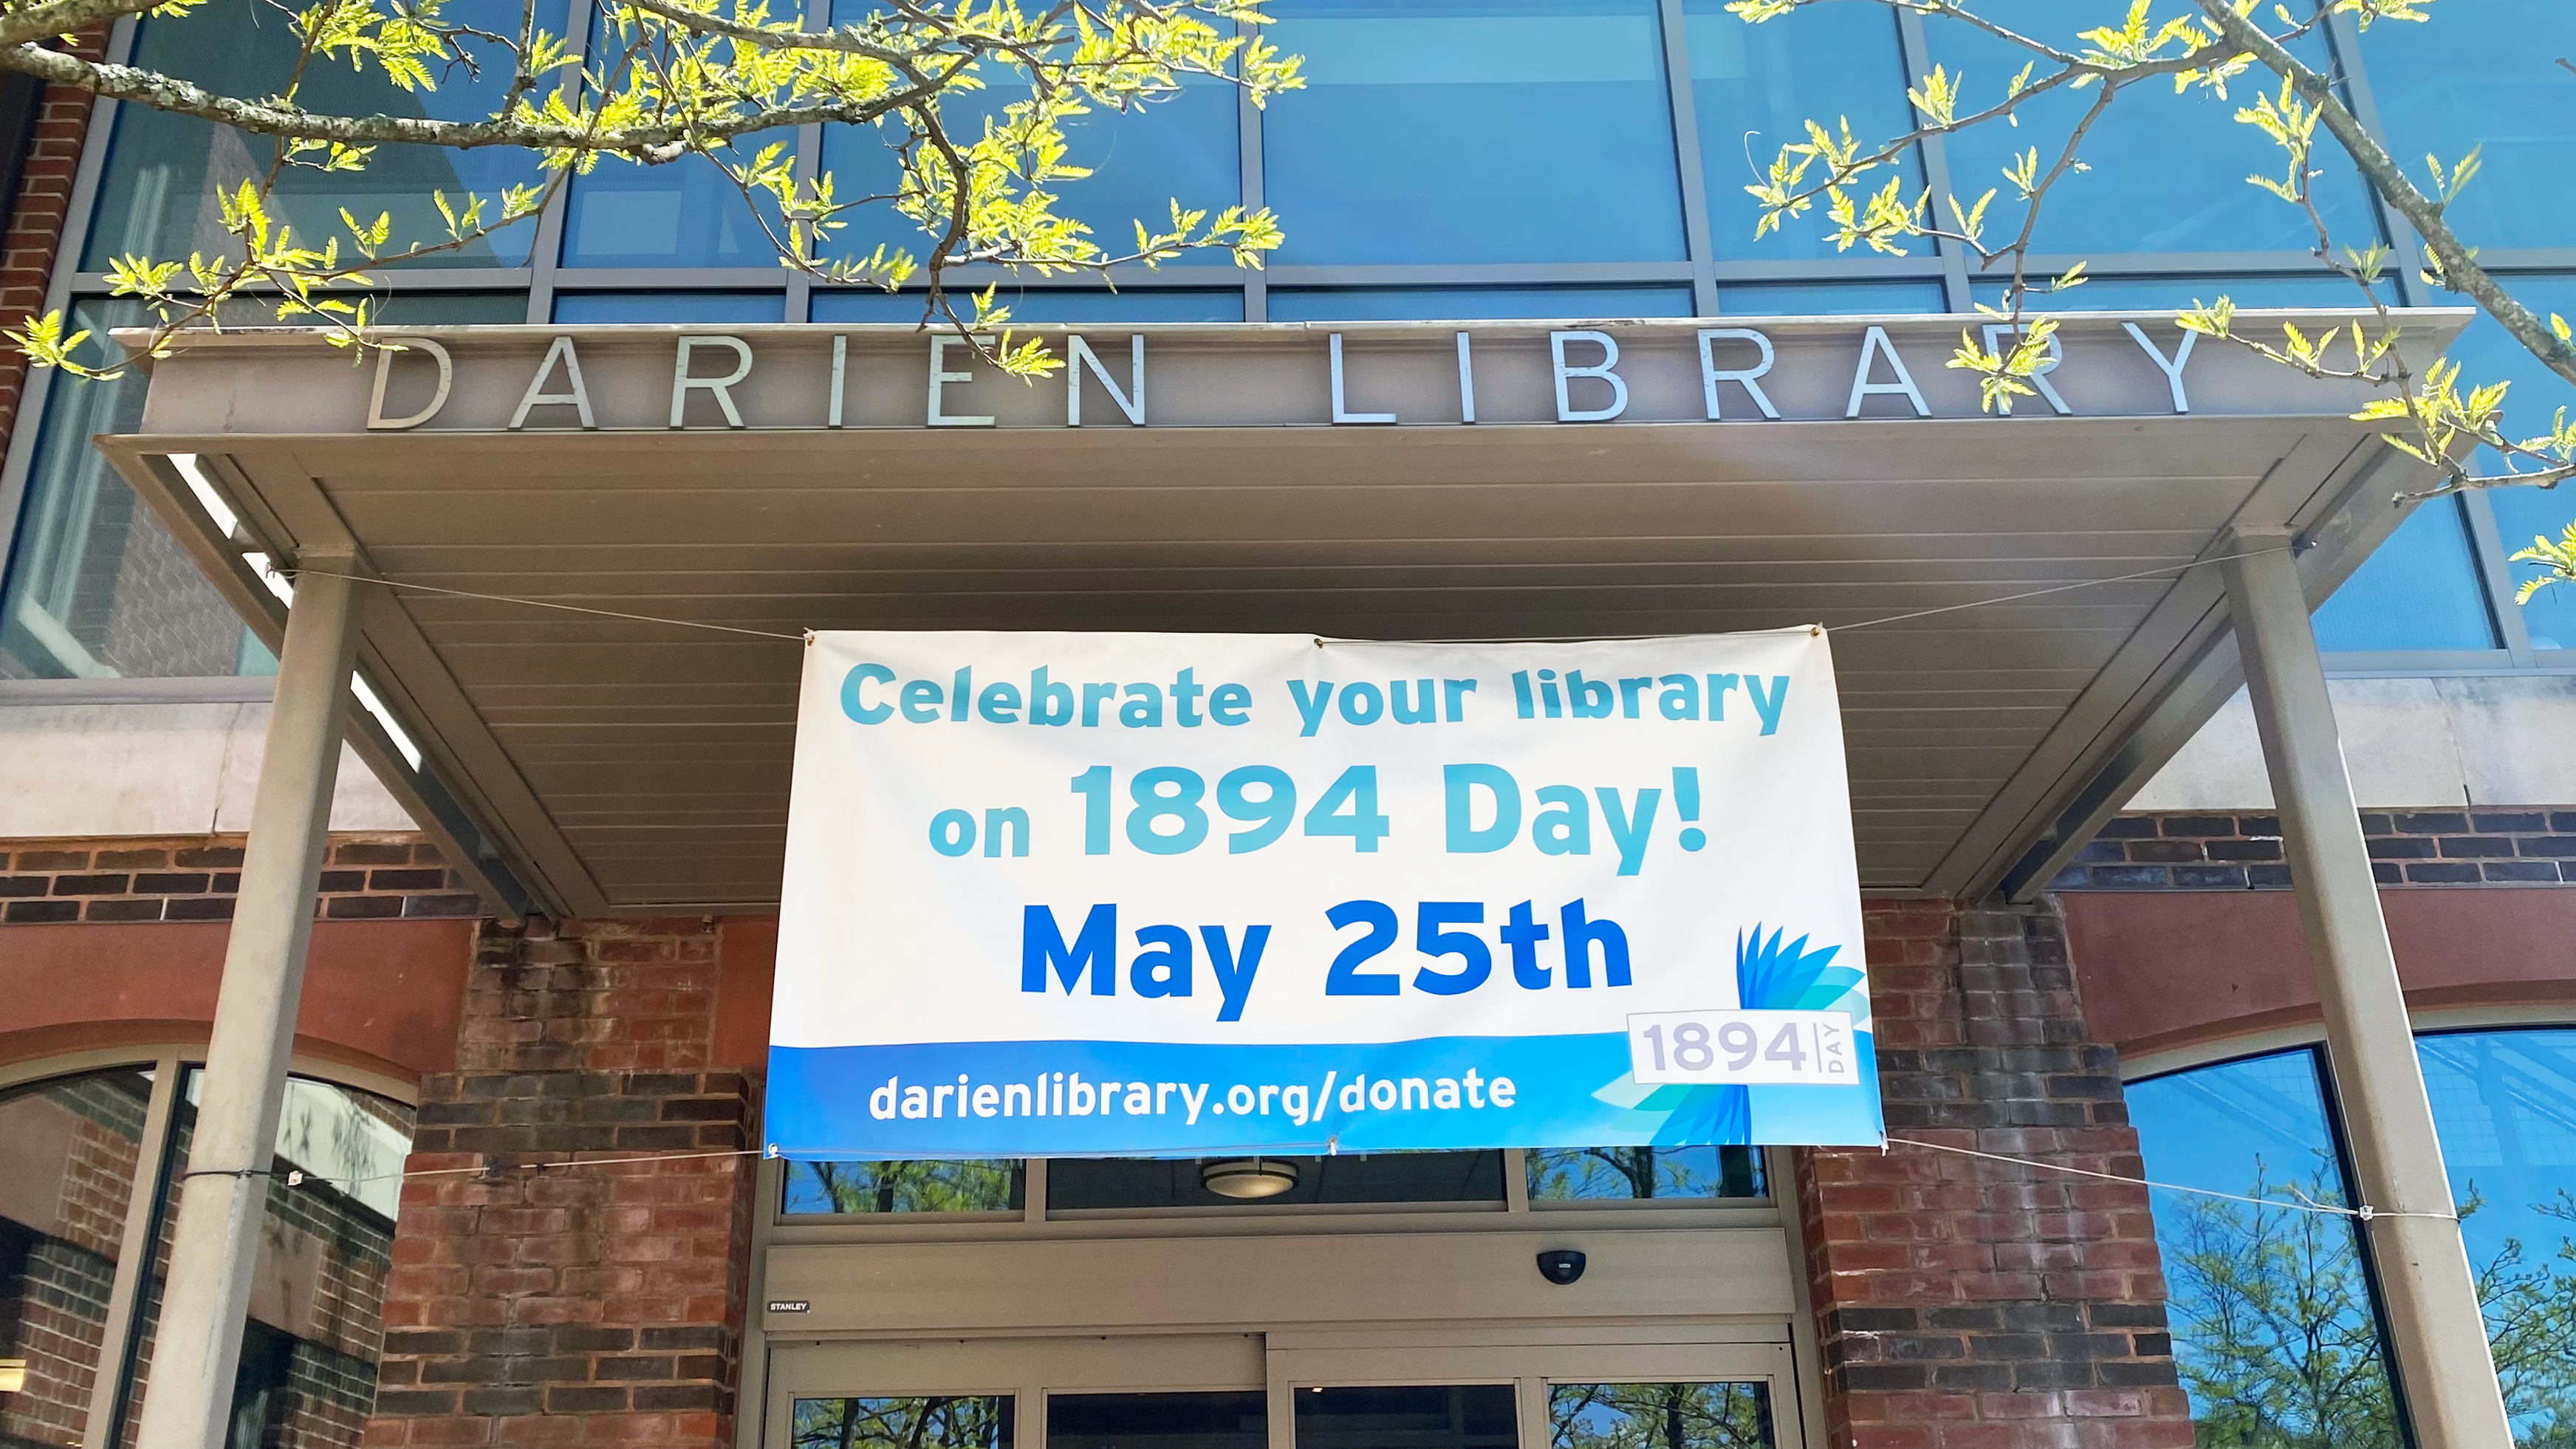 A banner under a sign reading "Darien Library" reads: "Celebrate your library on 1894 Day! May 25th!" darienlibrary.org/donate